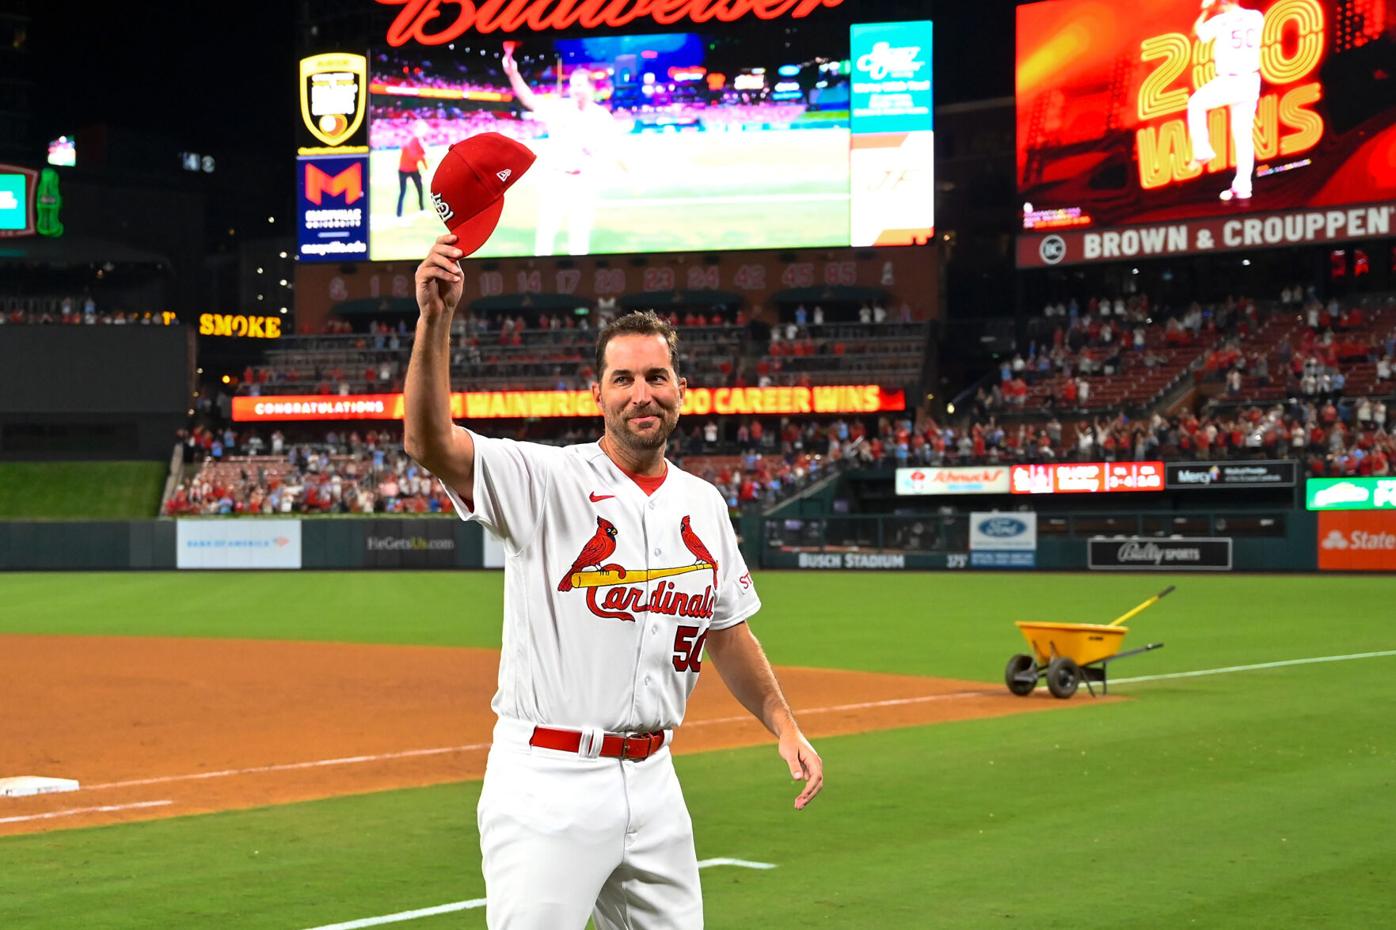 Local MLB player update: Adam Wainwright delivers his best